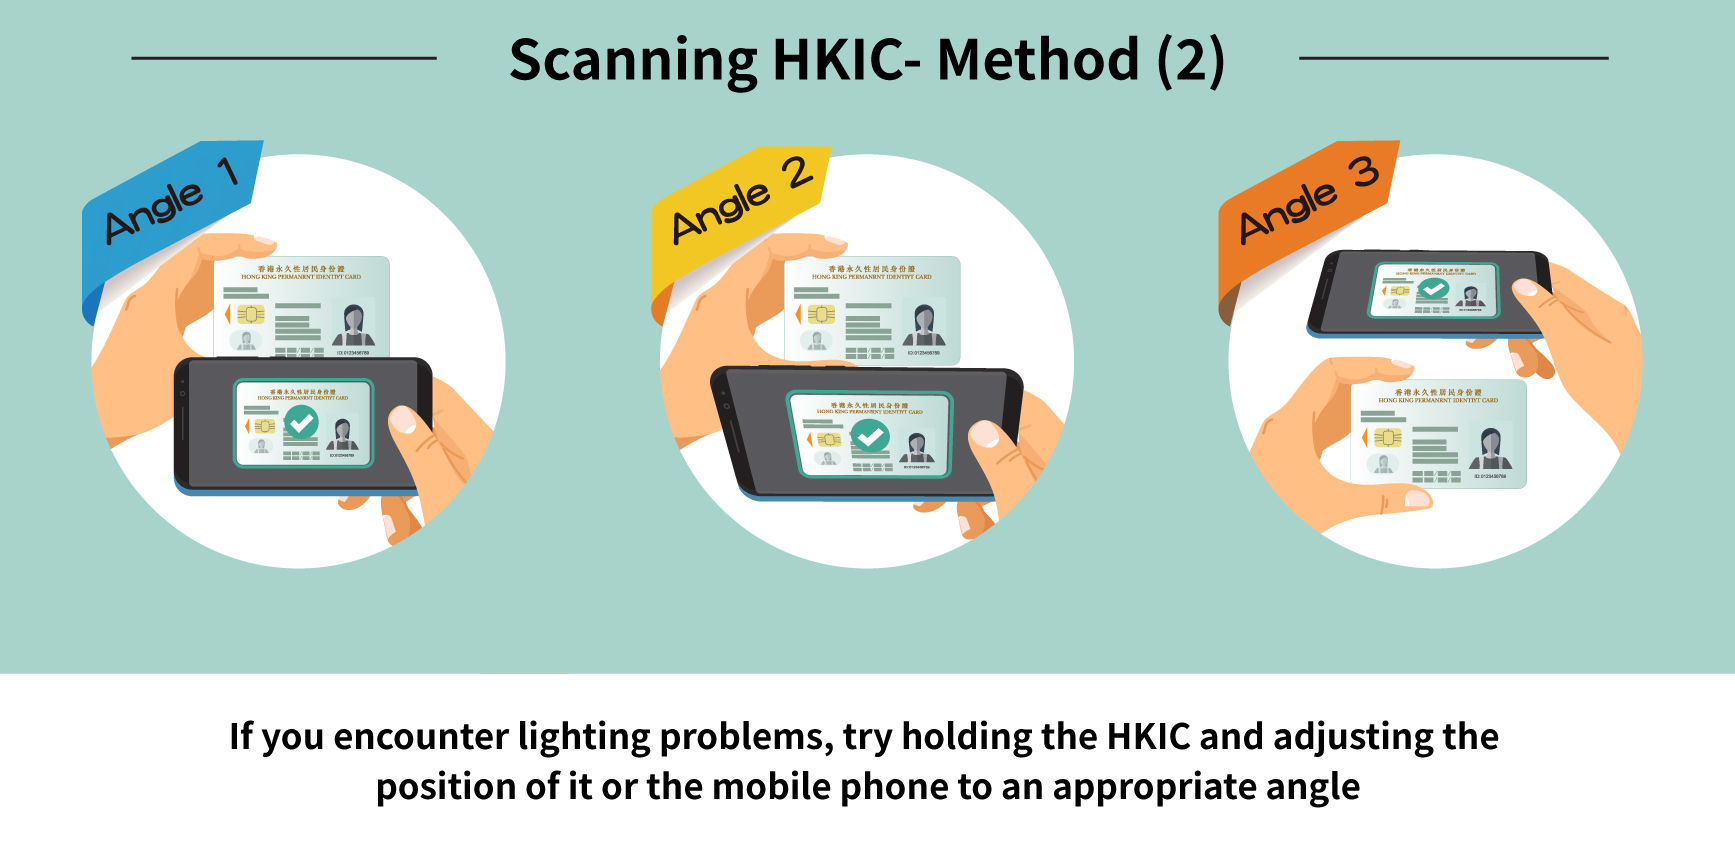 If you encounter lighting problems, try holding the HKIC and adjusting the position of it or the mobile phone to an appropriate angle